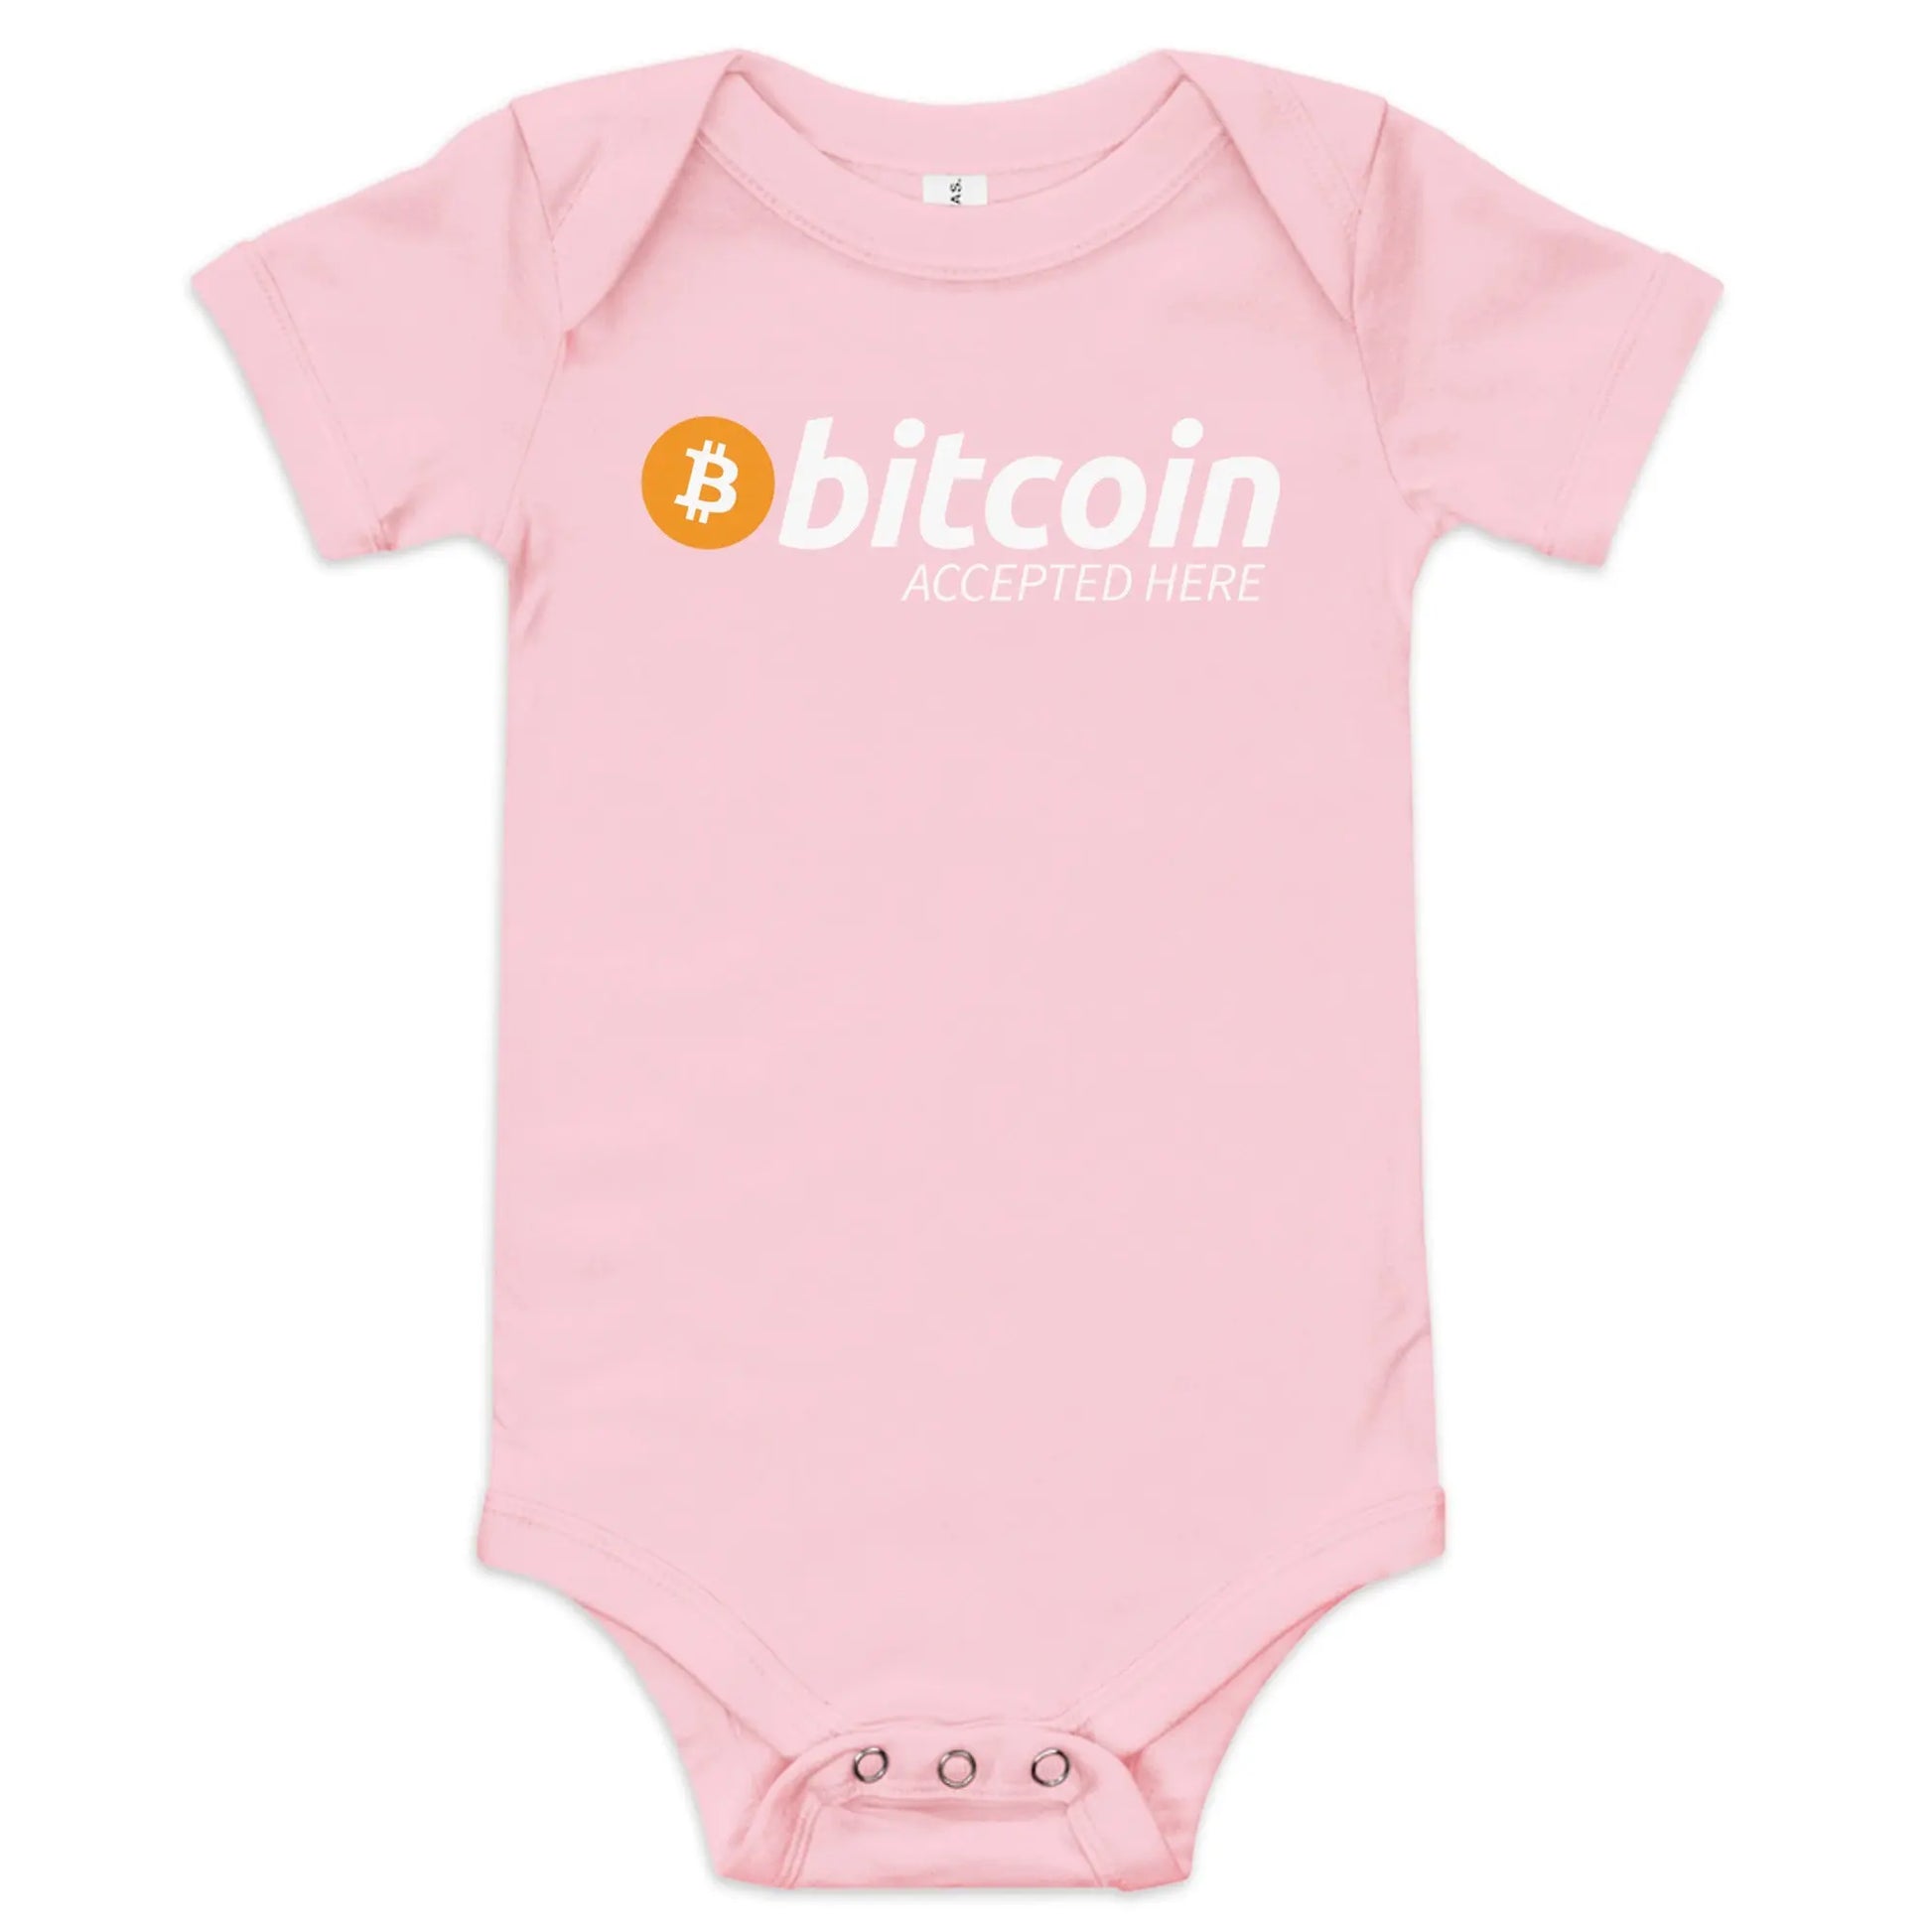 Bitcoin Accepted Here - Baby Bitcoin Body Suit - One Piece with Short Sleeve Pink